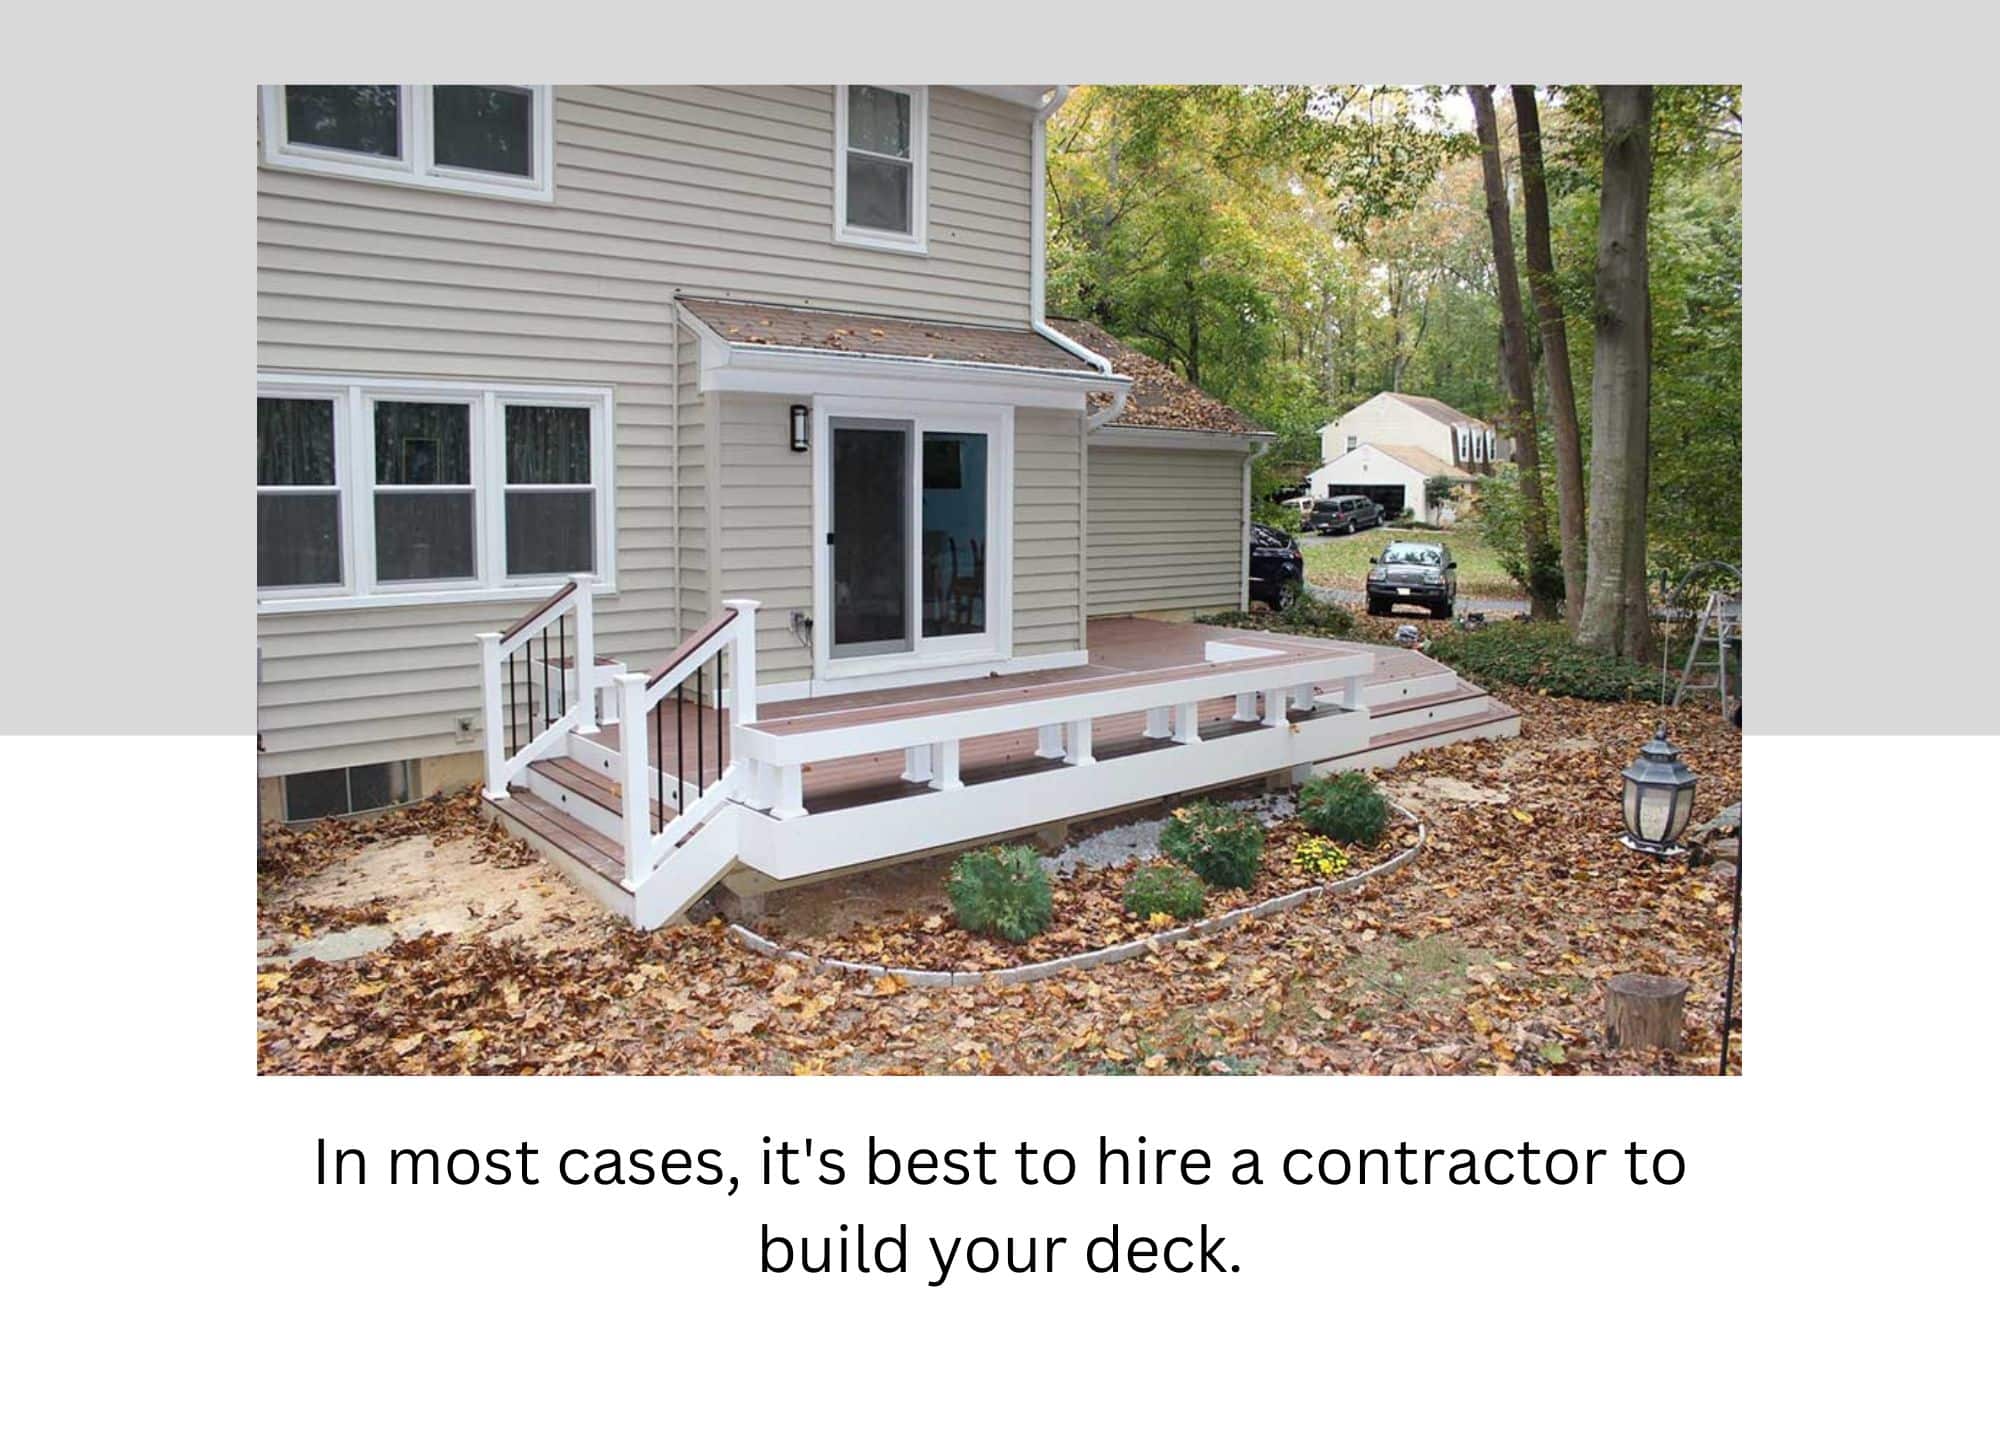 it is best to hire a contractor to build your deck